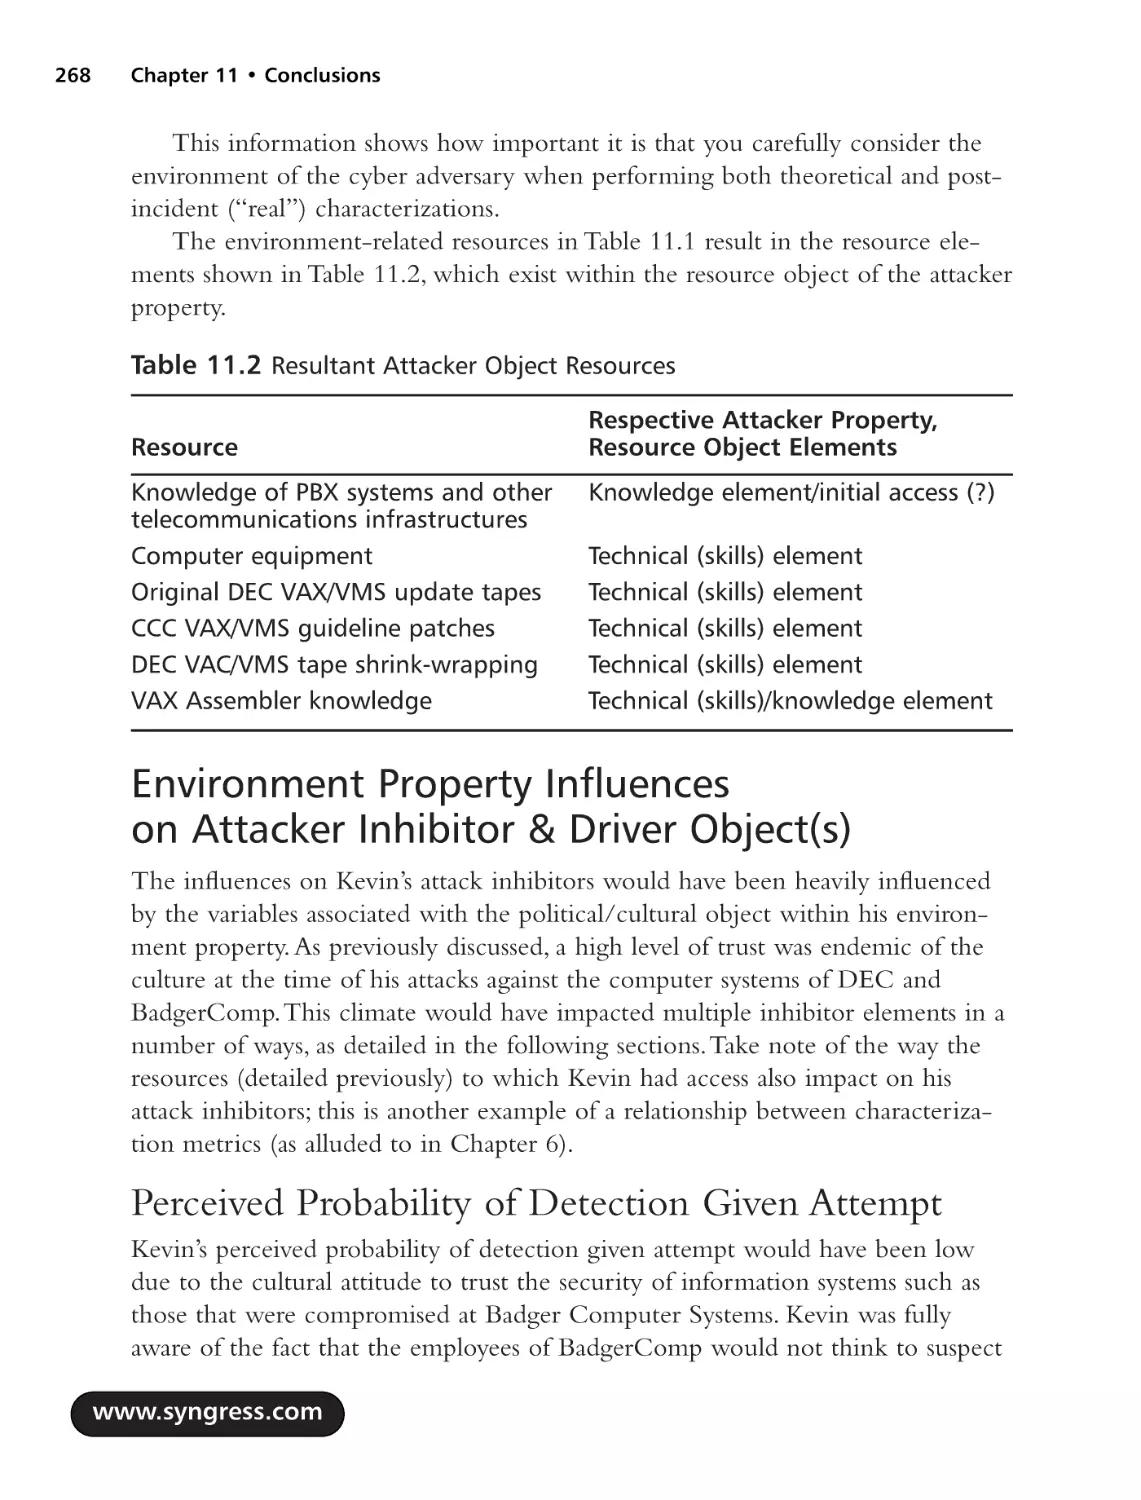 Environment Property Influences on Attacker Inhibitor & Driver Object(s)
Perceived Probability of Detection Given Attempt